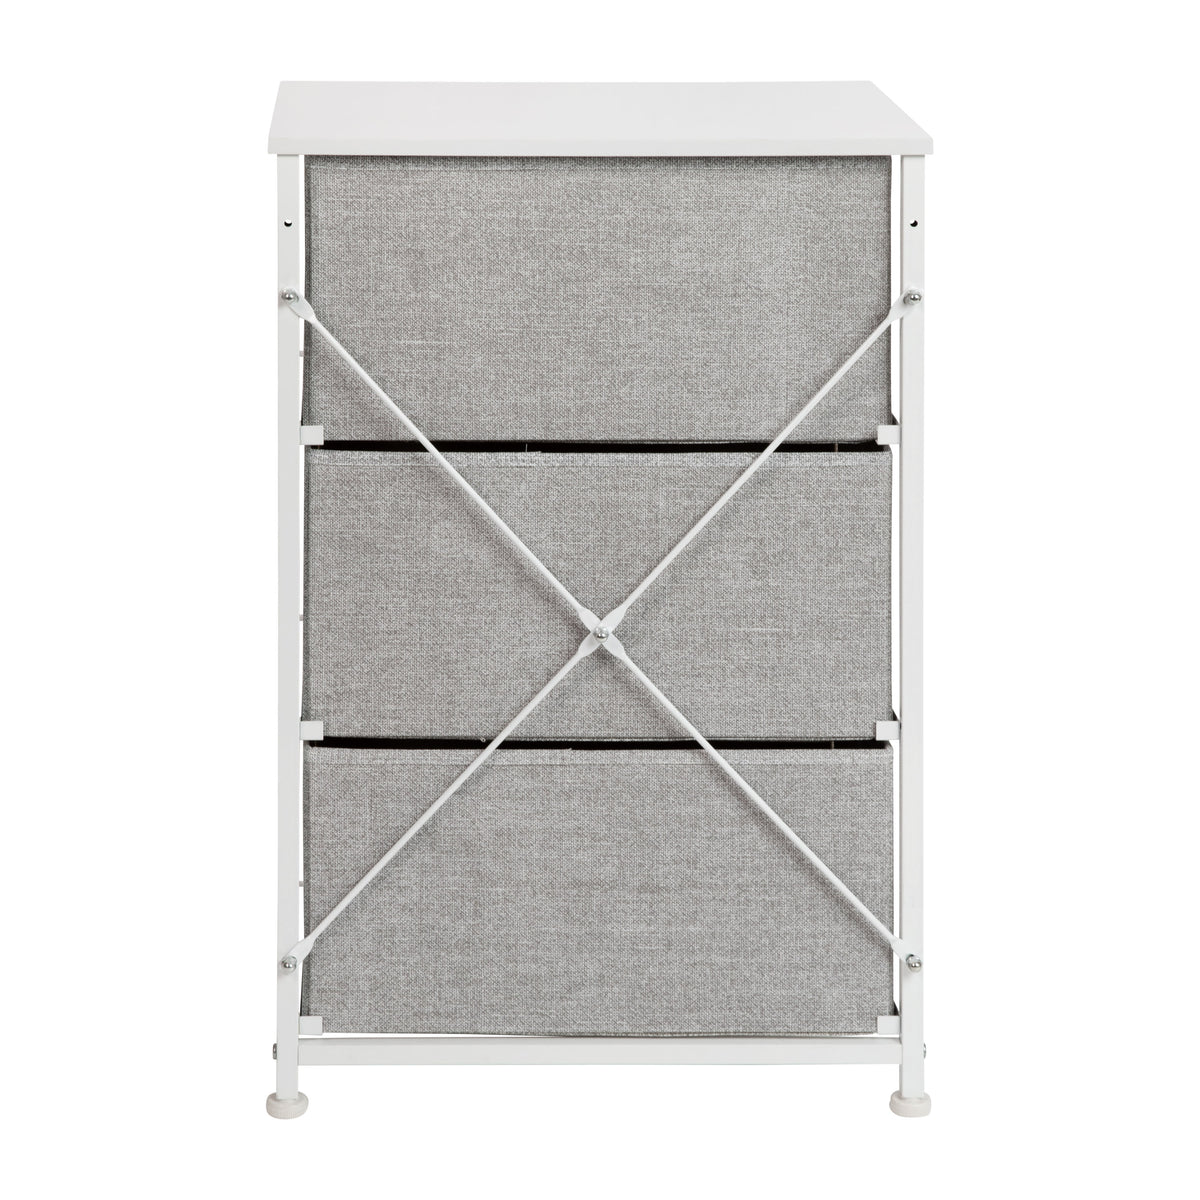 Gray Drawers/White Frame |#| 3 Drawer Vertical Storage Dresser with White Wood Top & Gray Fabric Pull Drawers